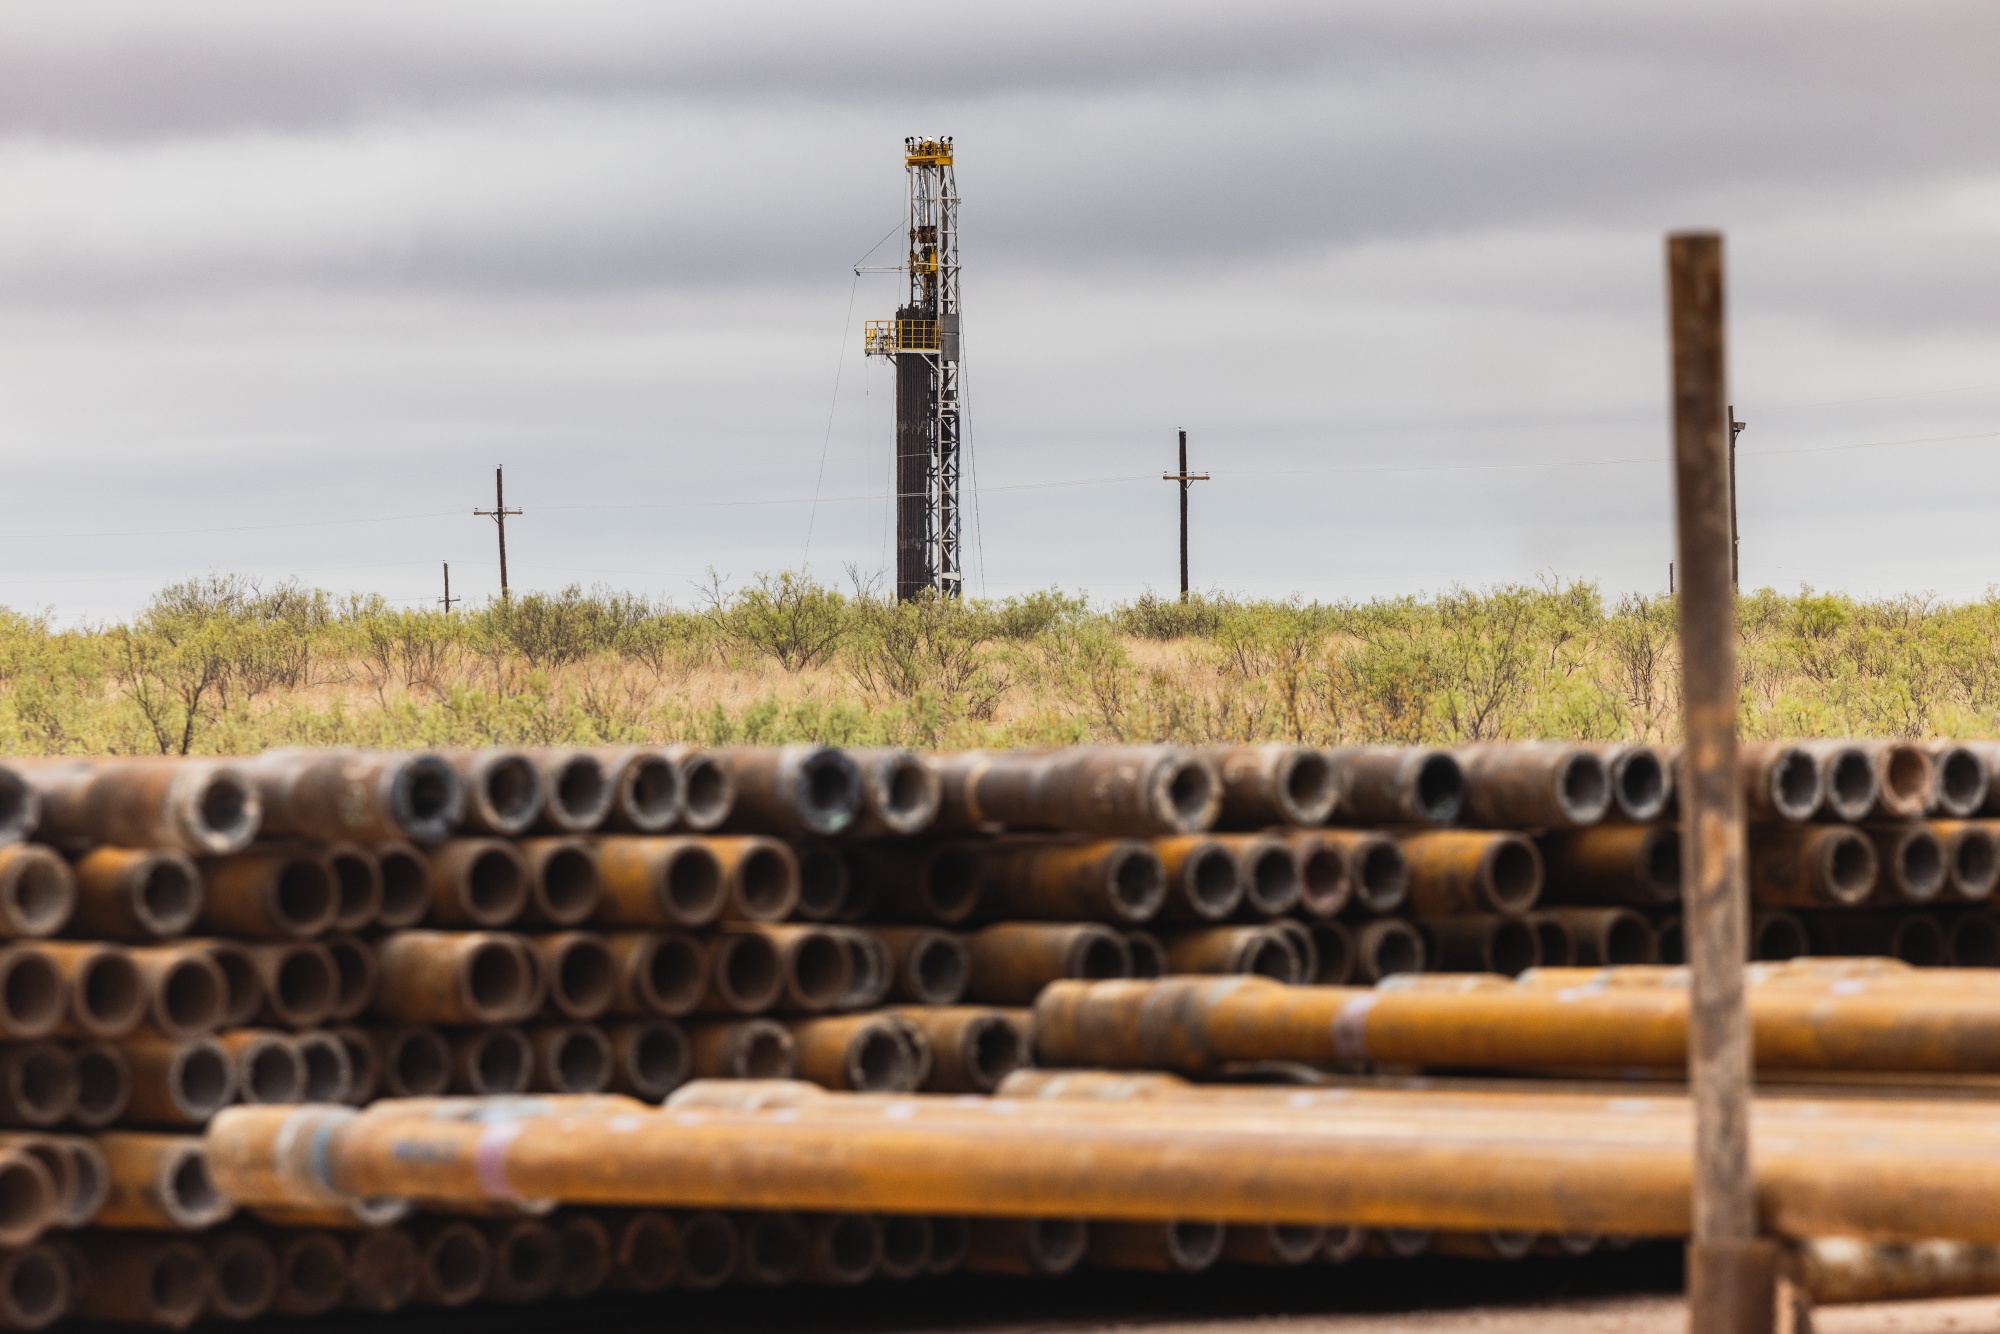 Stacks of steel pipes used for drilling oil wells at a drilling site on the land that the University of Texas System overseas in Andrews, Texas, US.